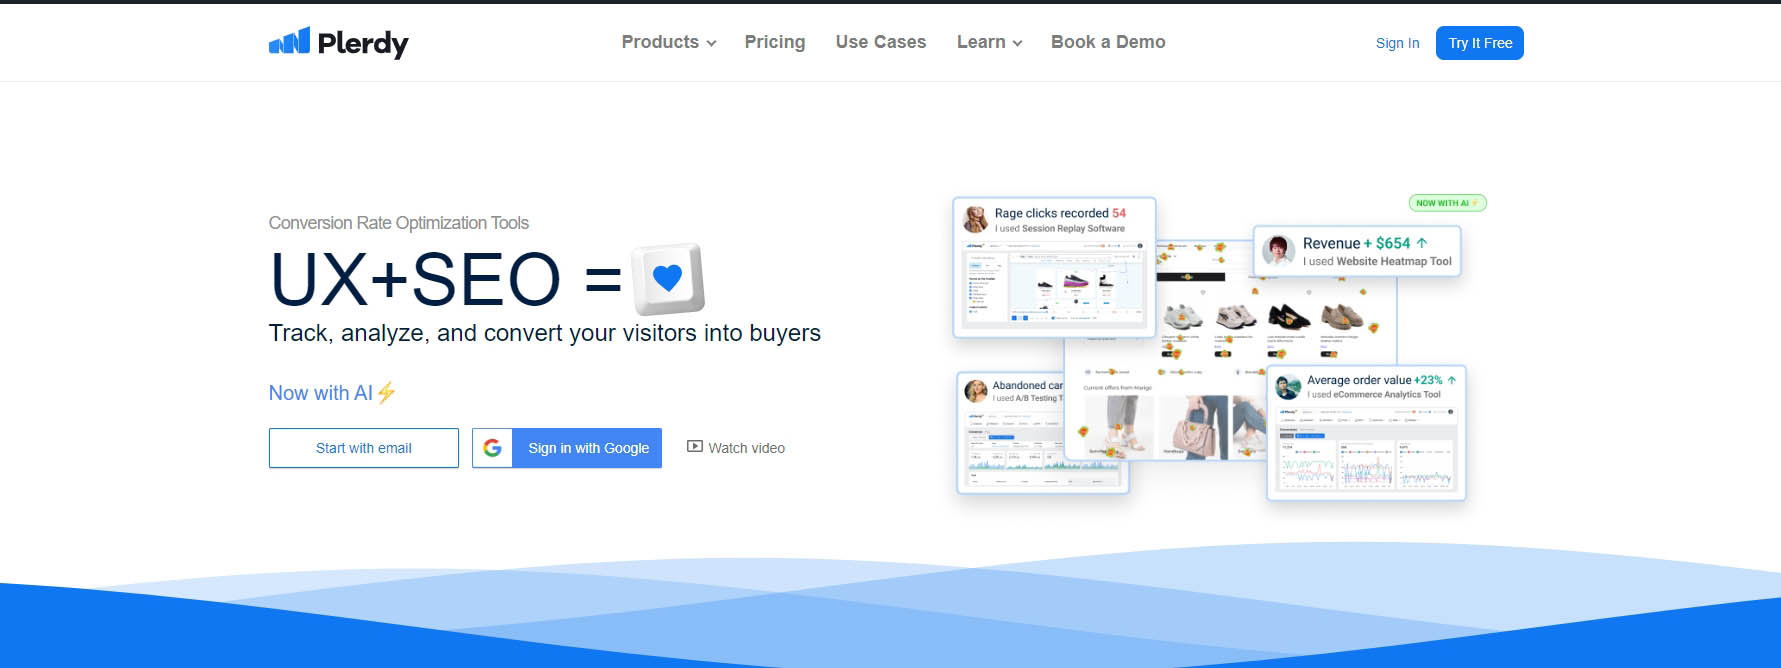 Ecommerce Marketing: A Comprehensive Guide 09